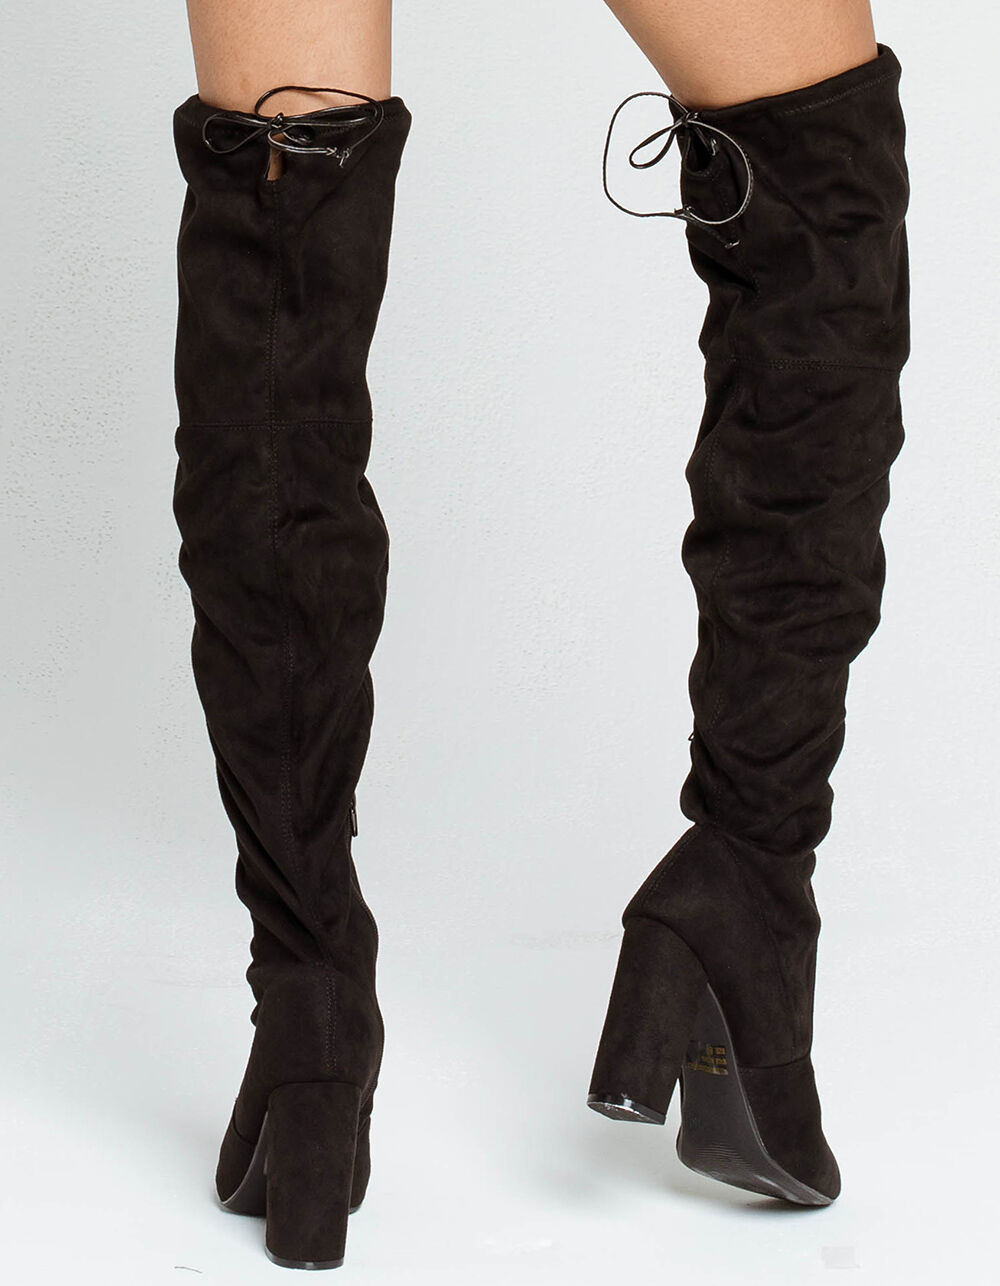 WILD DIVA Over The Knee Womens Heeled Boots - BLACK | Tillys